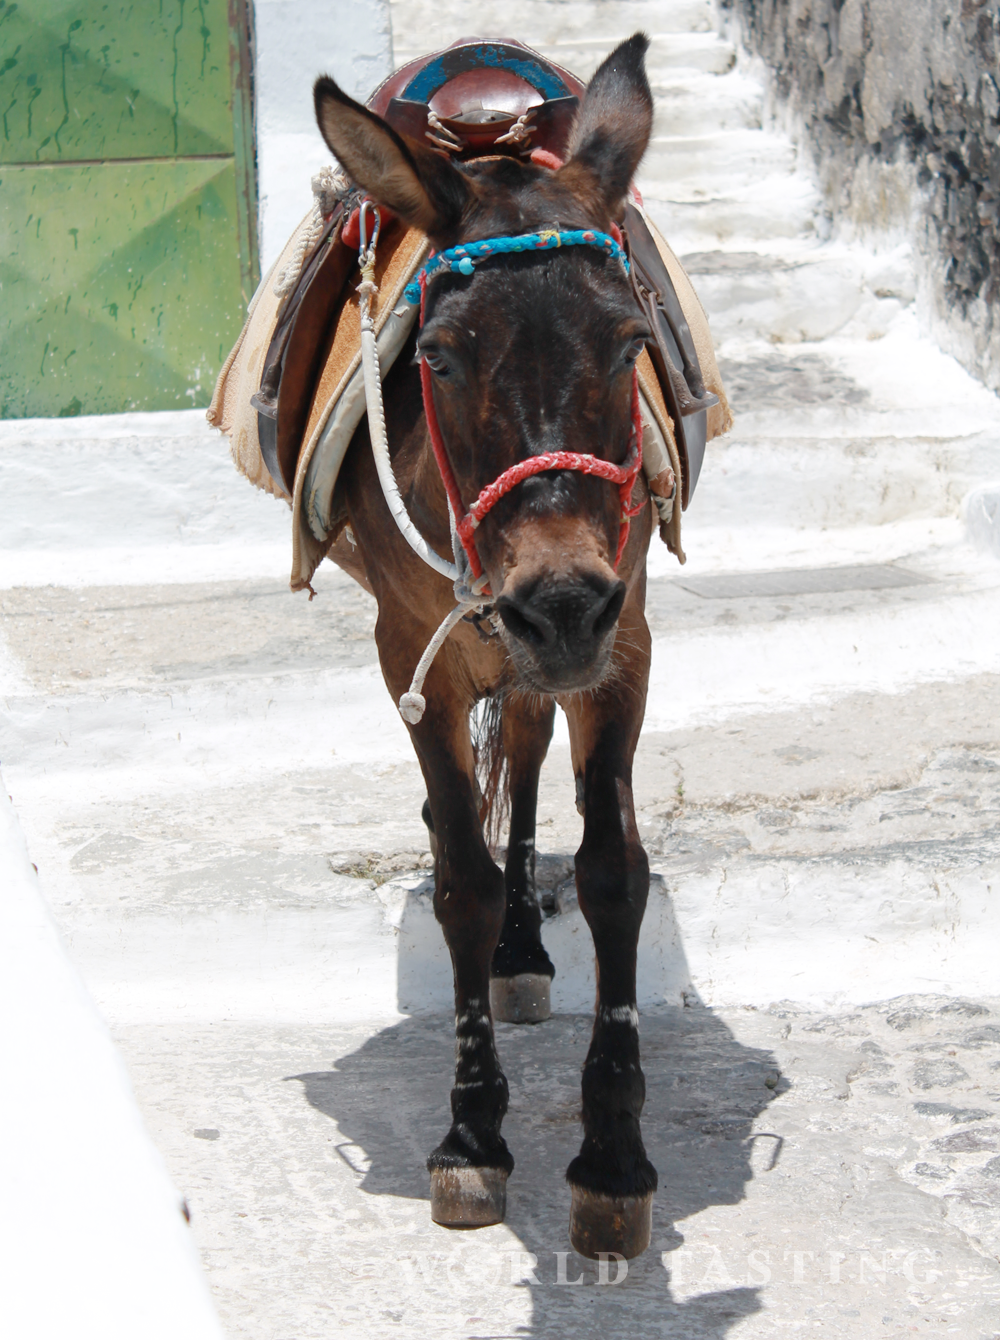 The donkeys are one of the main transportation means on the island of Santorini